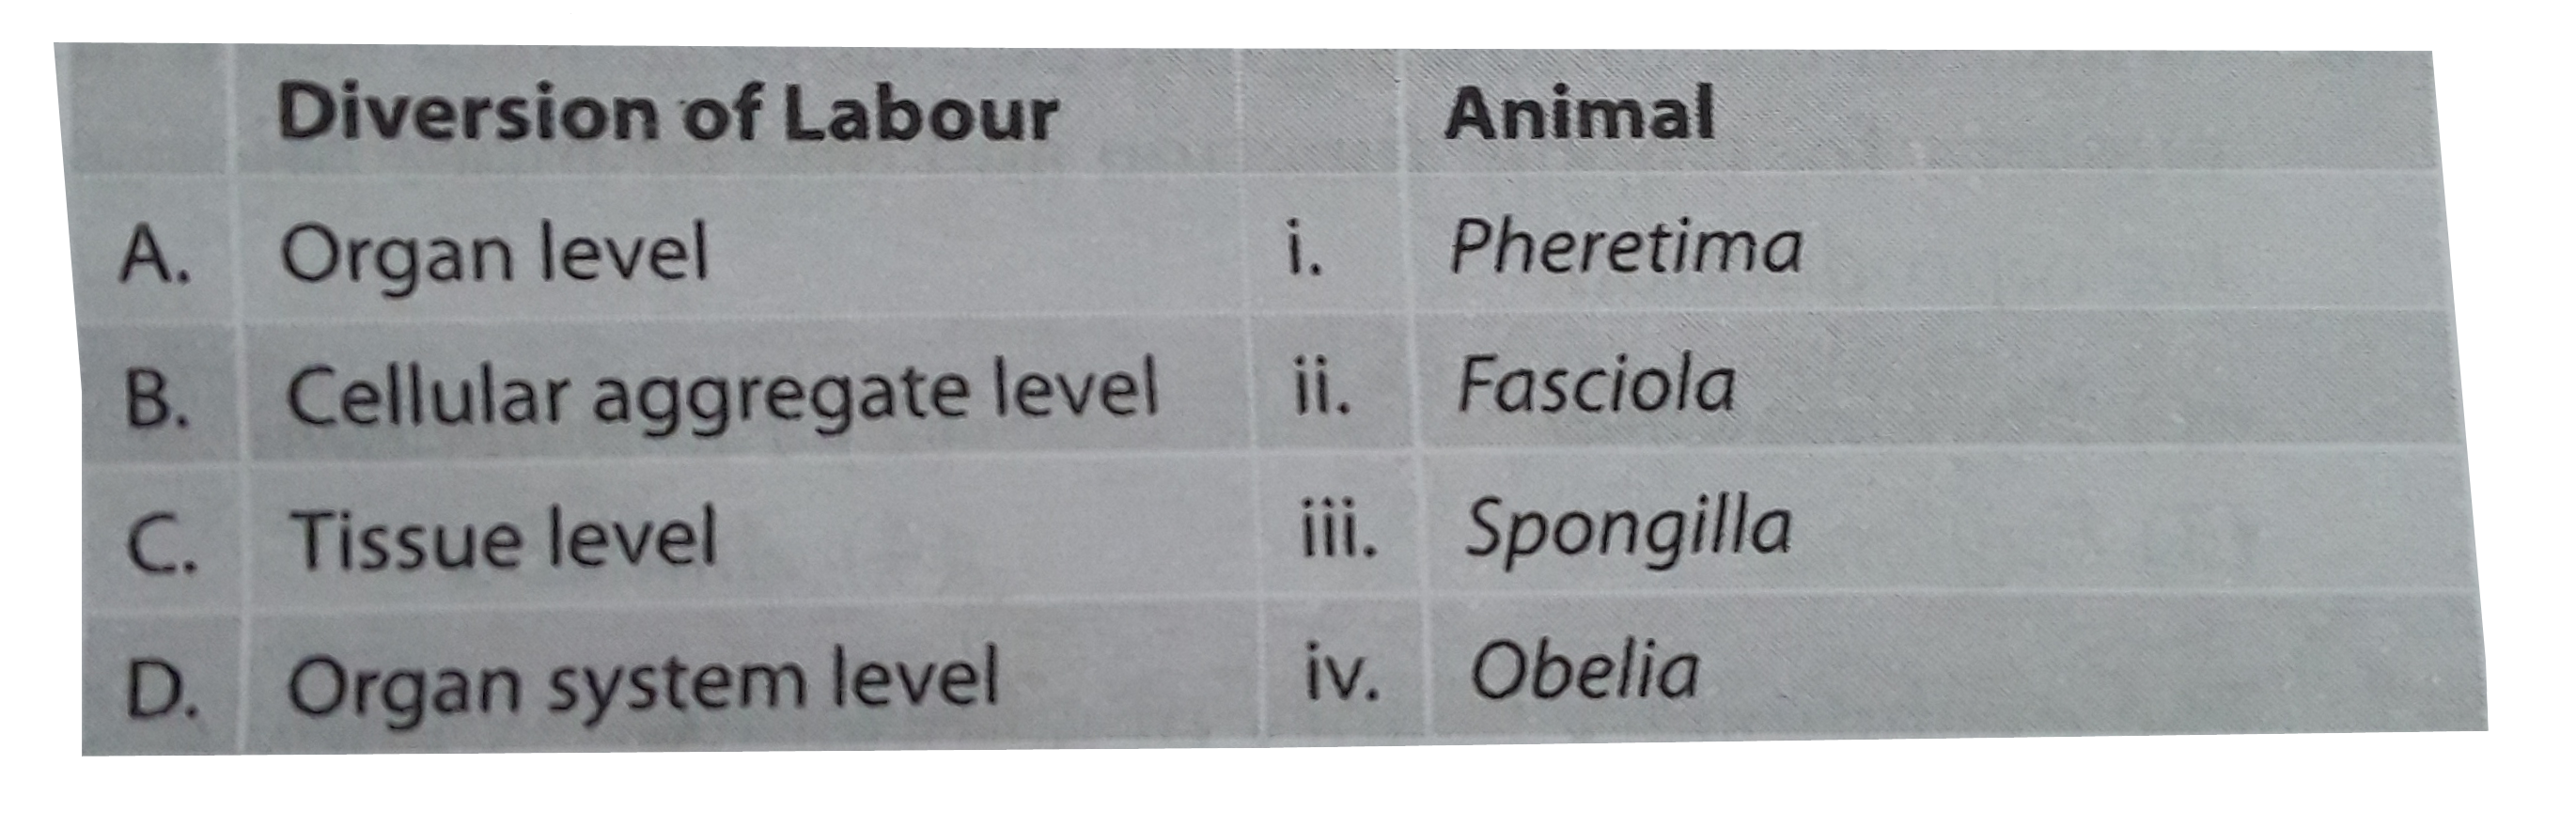 Match the following list of animals with their level of organisation :      Choose the correct match showing division of labour  with animals.